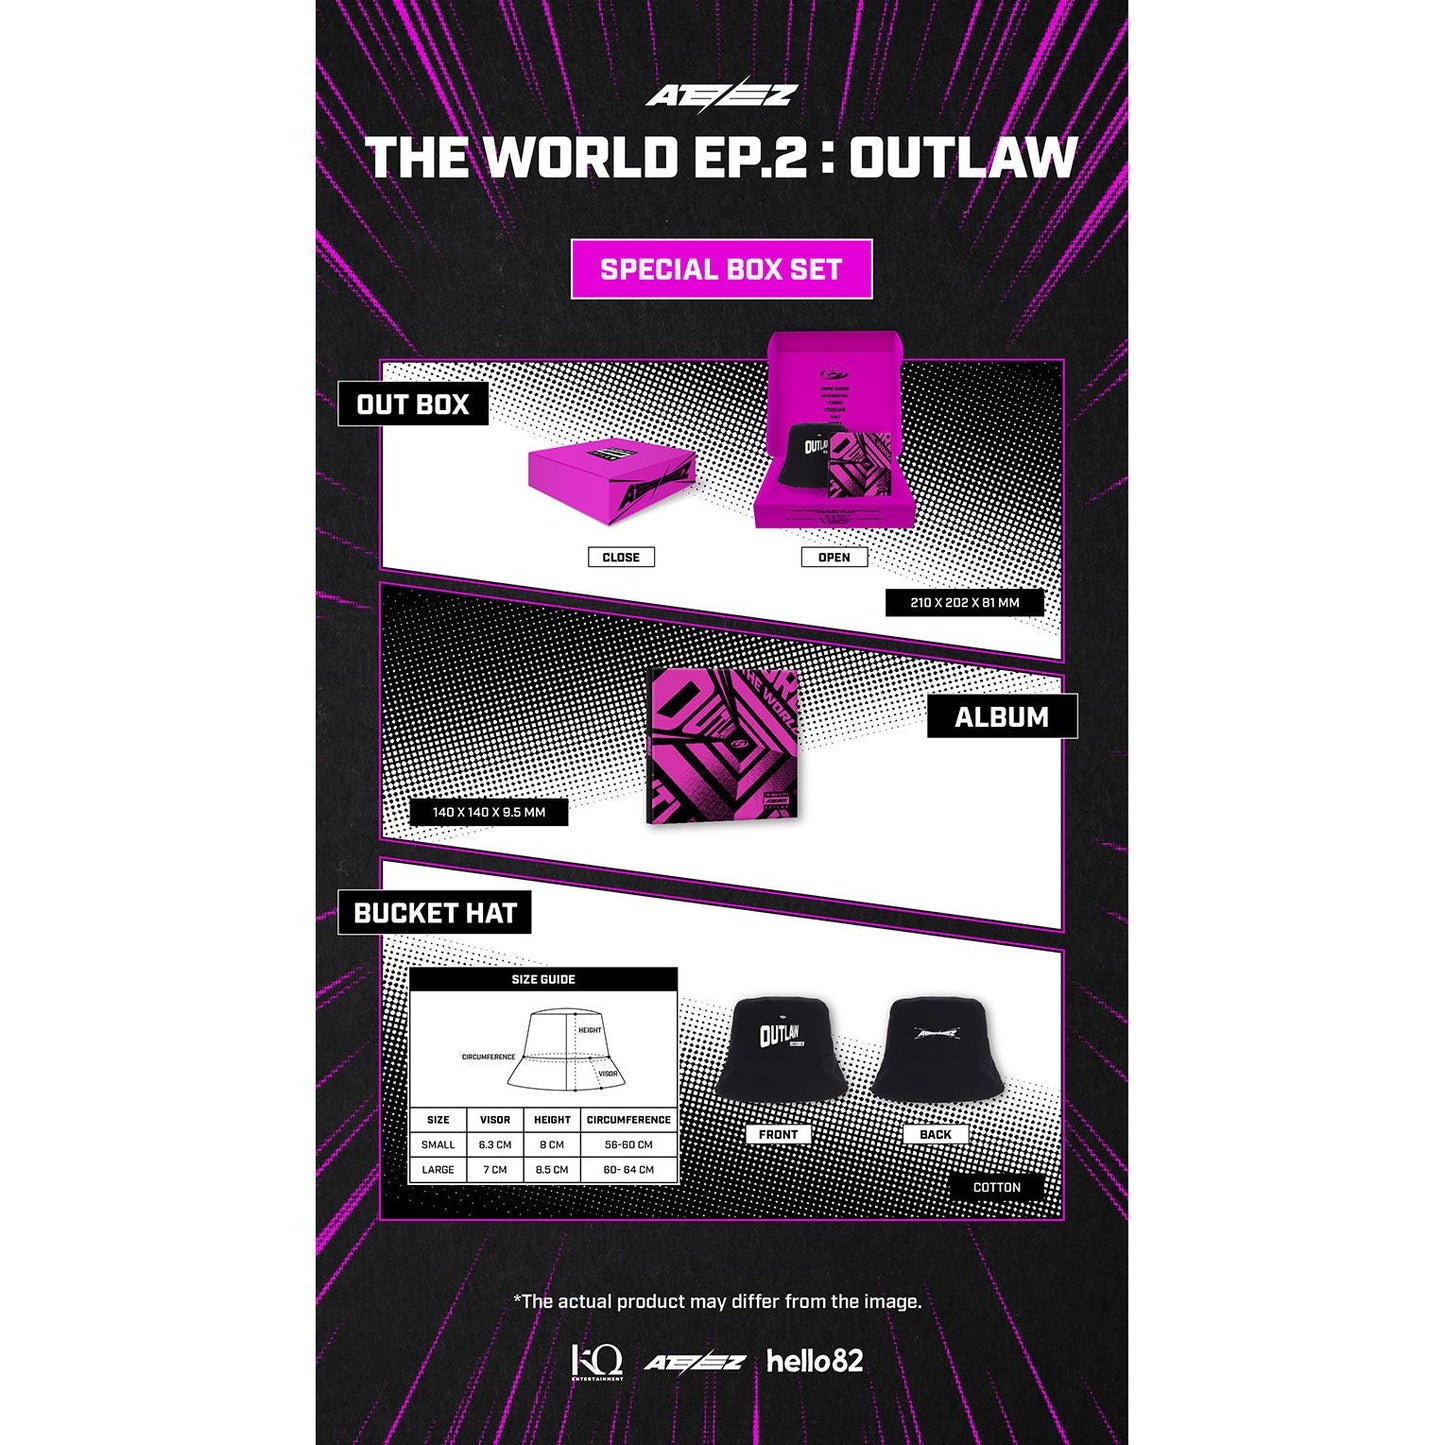 ATEEZ - The World EP.2 Outlaw [Special Box Set]